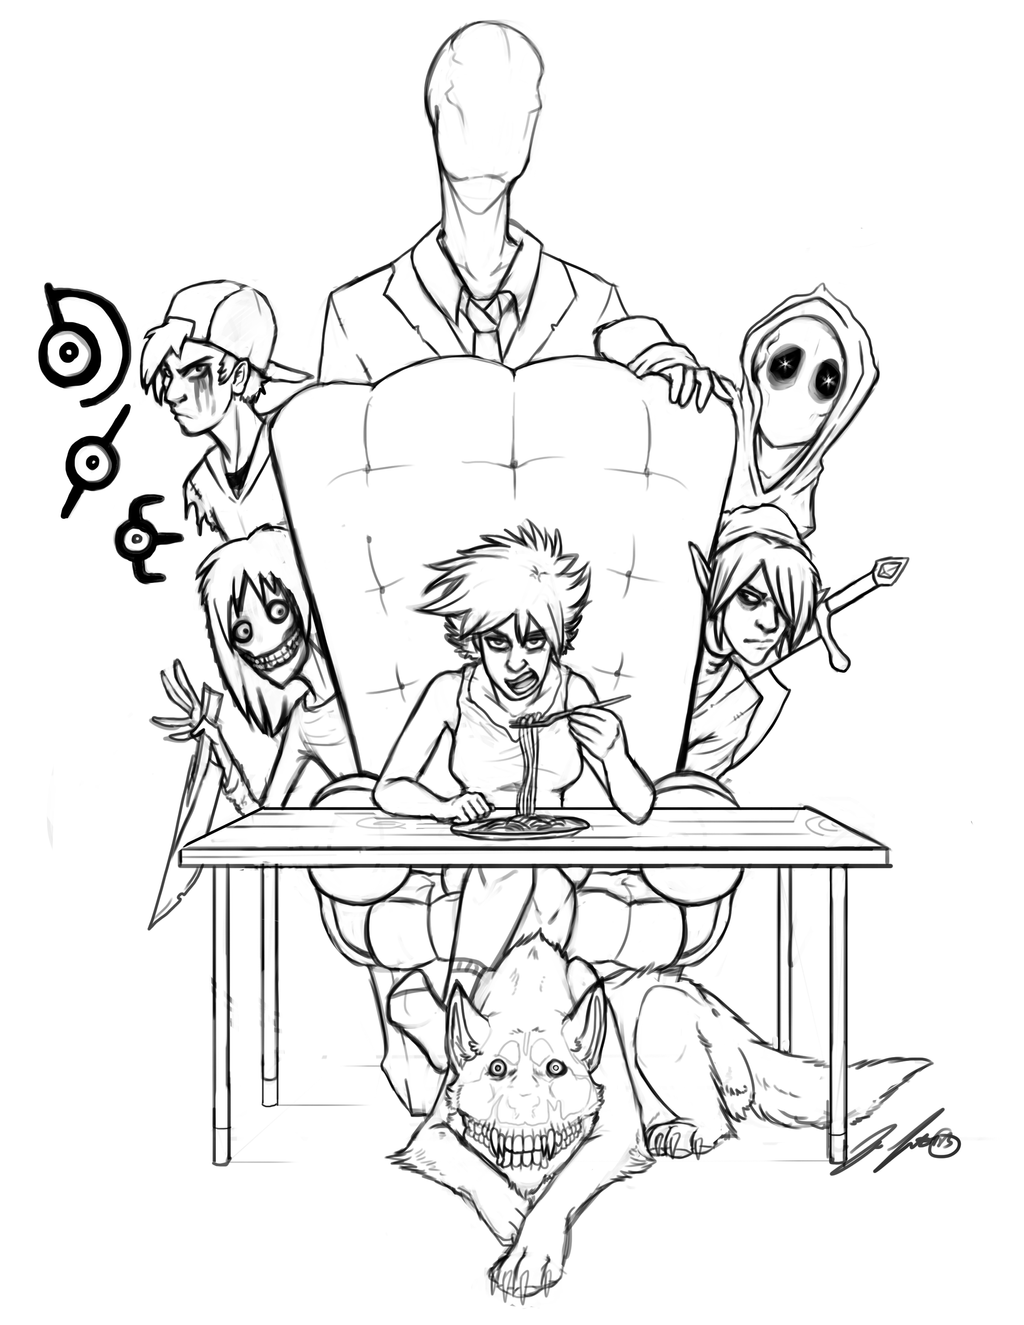 creepypasta-family-coloring-page-coloring-pages